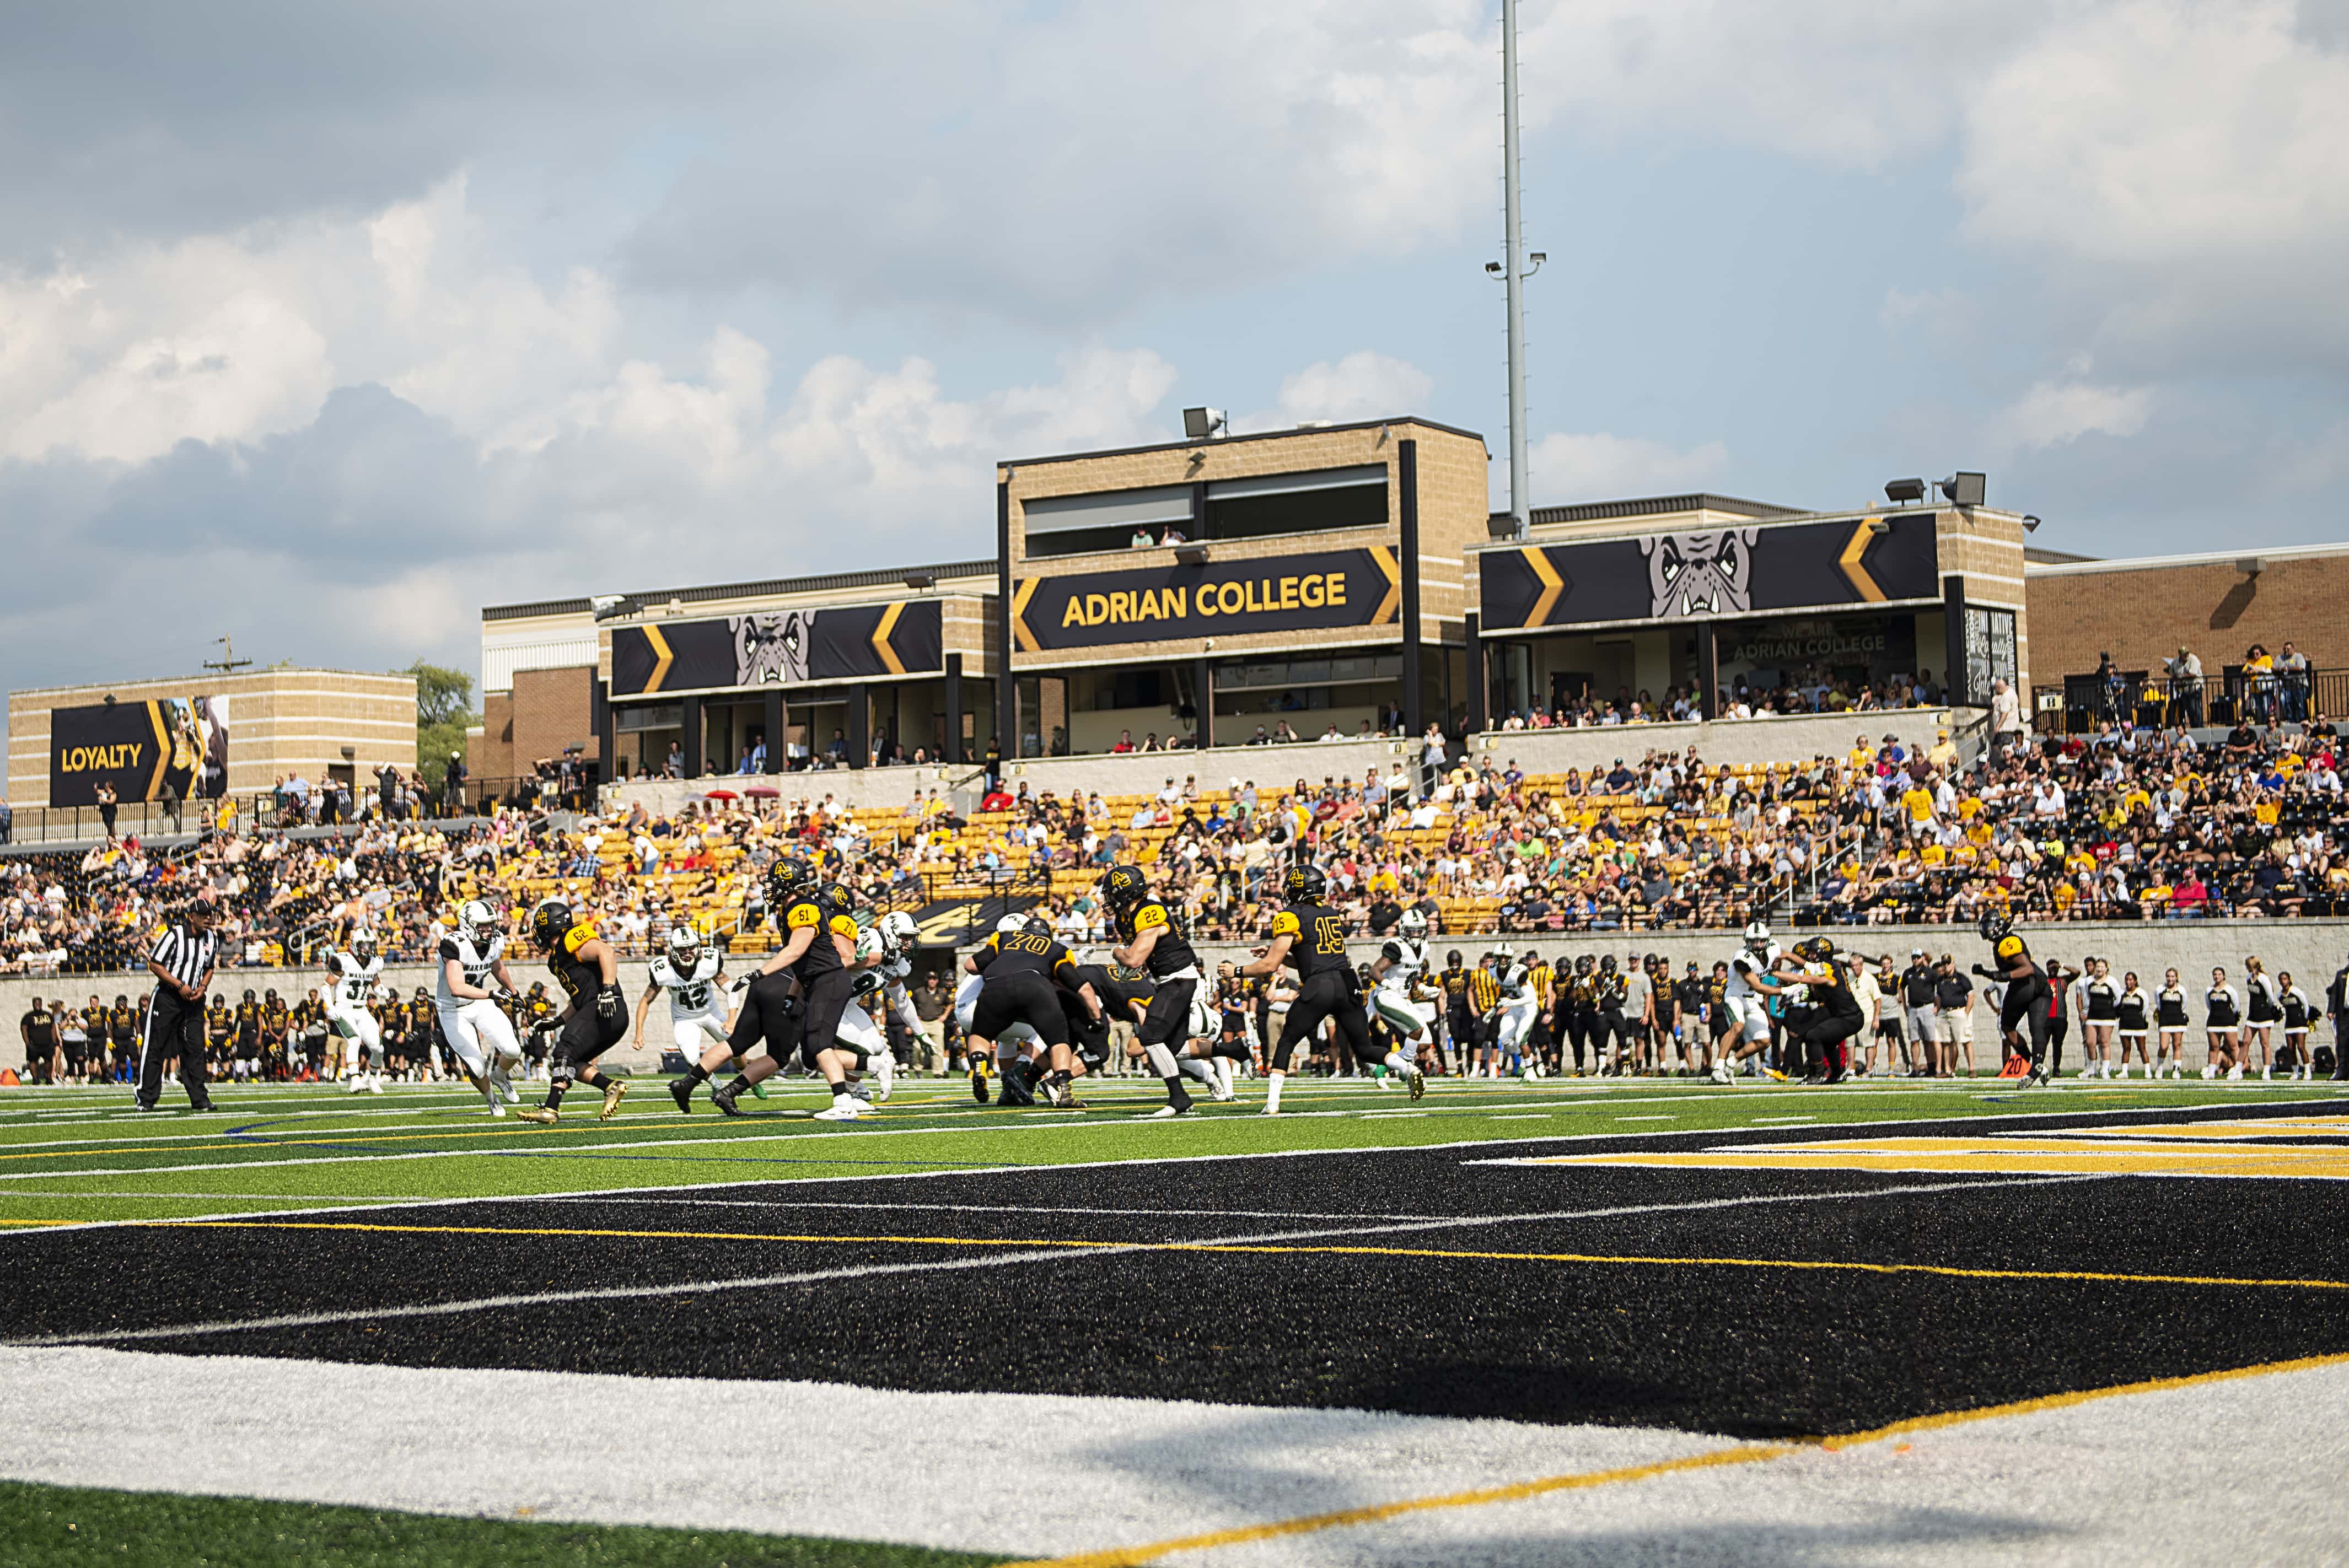 Adrian College Football Season Tickets on Sale Starting July 26th | 96.